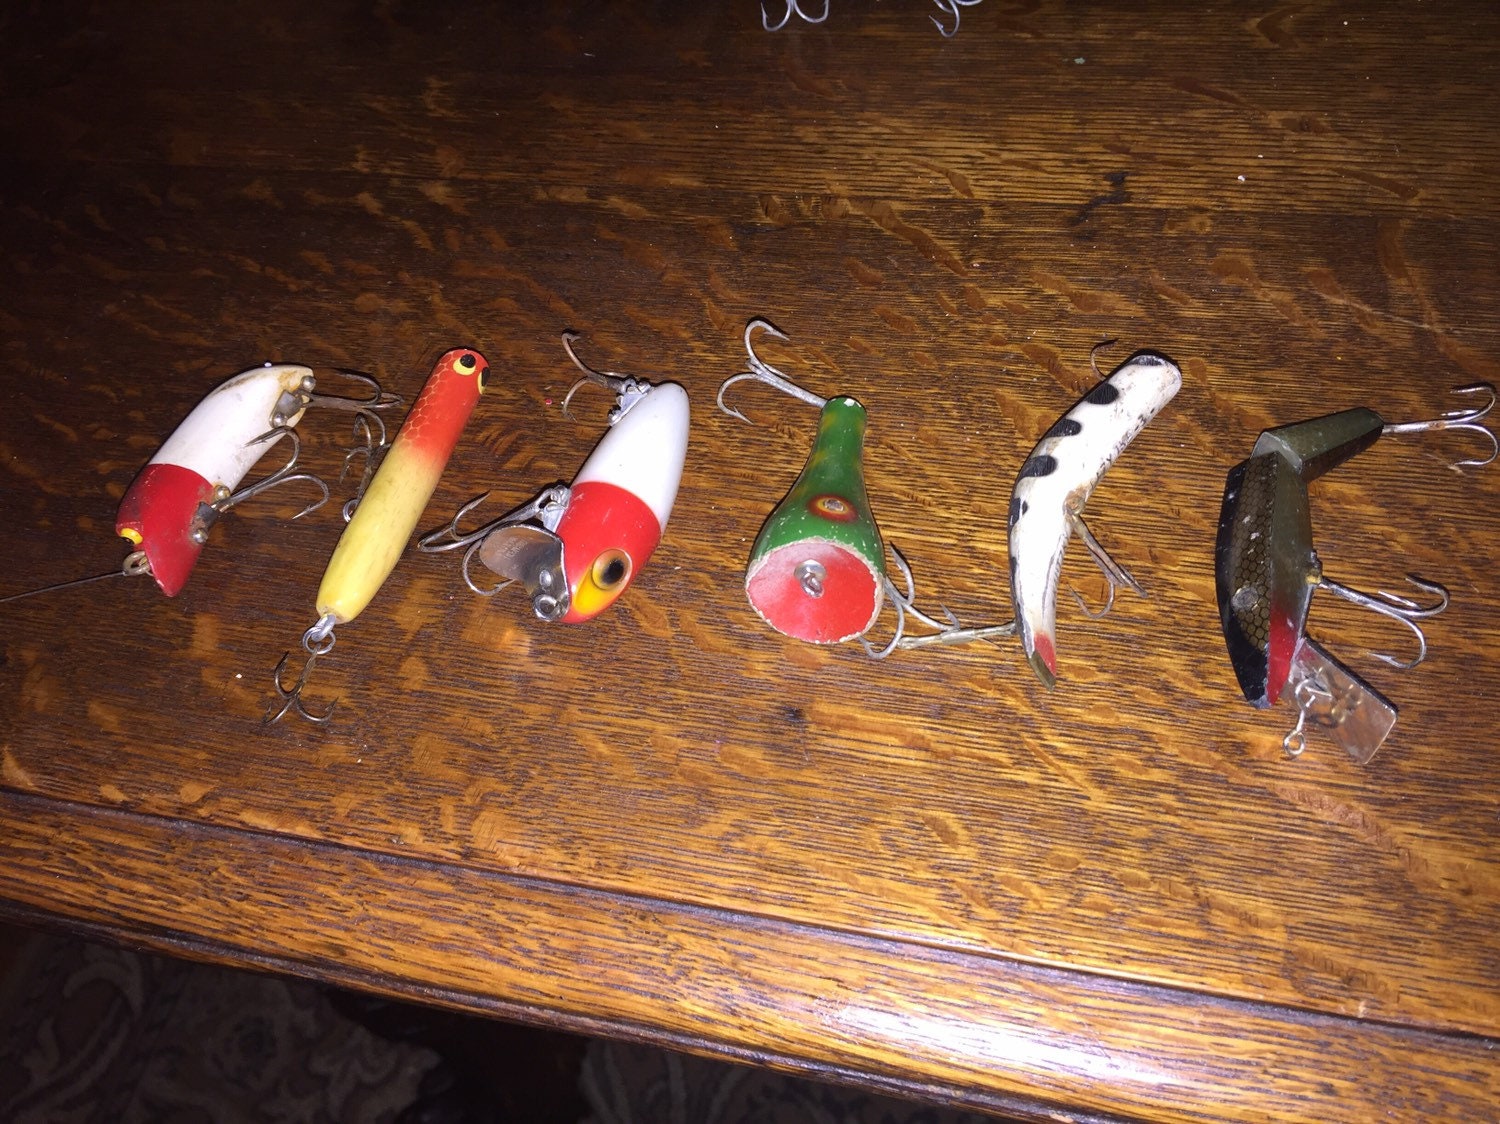 Set of 6 Antique/vintage Fishing Lures, Tackle, Gear, Freshwater, Saltwater,  Fishing, Folk Art, Handmade, Bait, Listing is for Set of Six -  Ireland